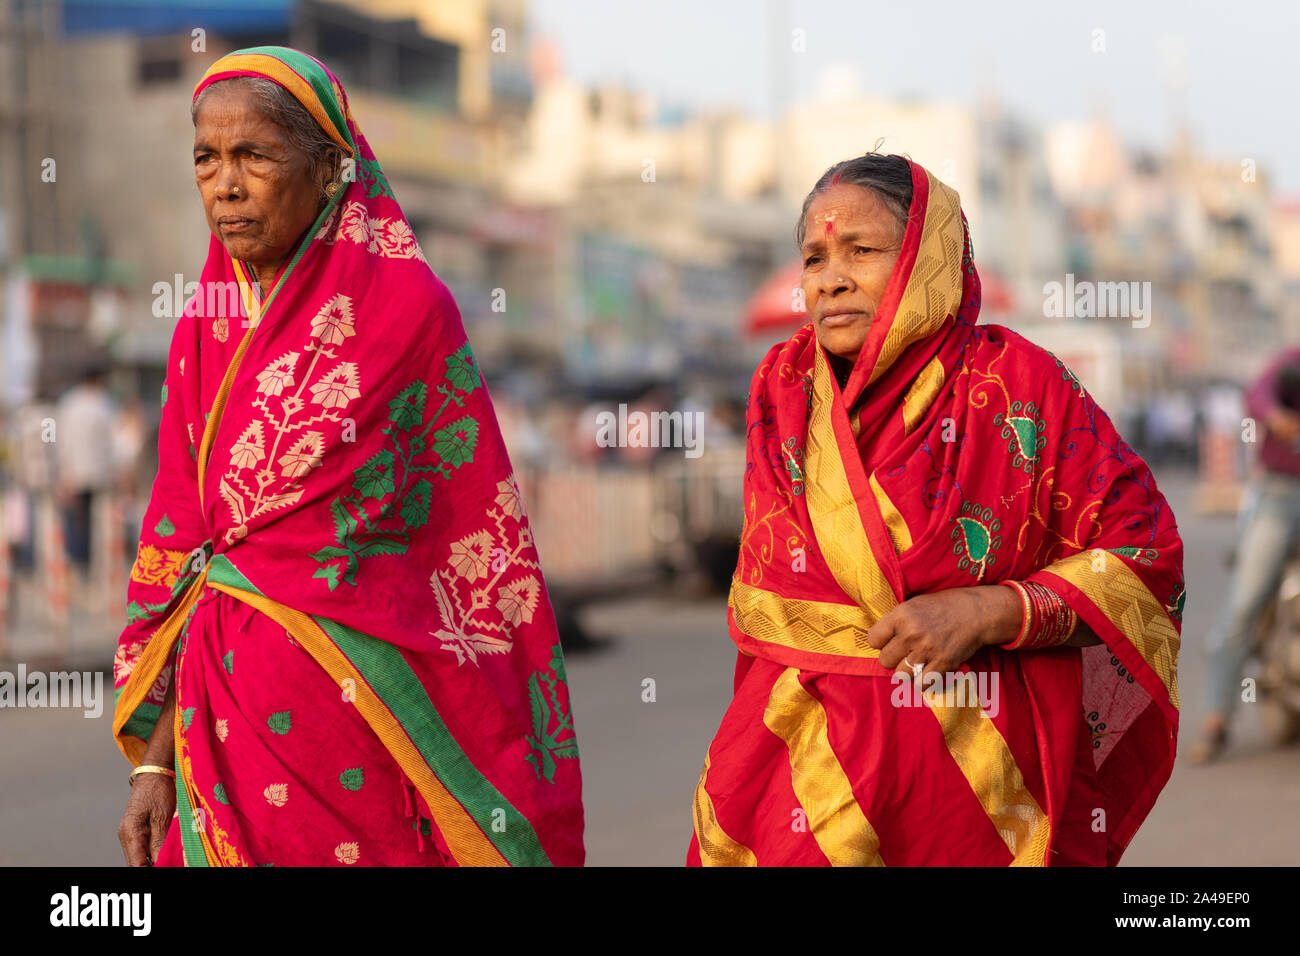 PURI, INDIA, JANUARY 13, 2019 : Two Indian women in traditional saree are walking in the street of the large market near the Shree Jagannath Temple Stock Photo